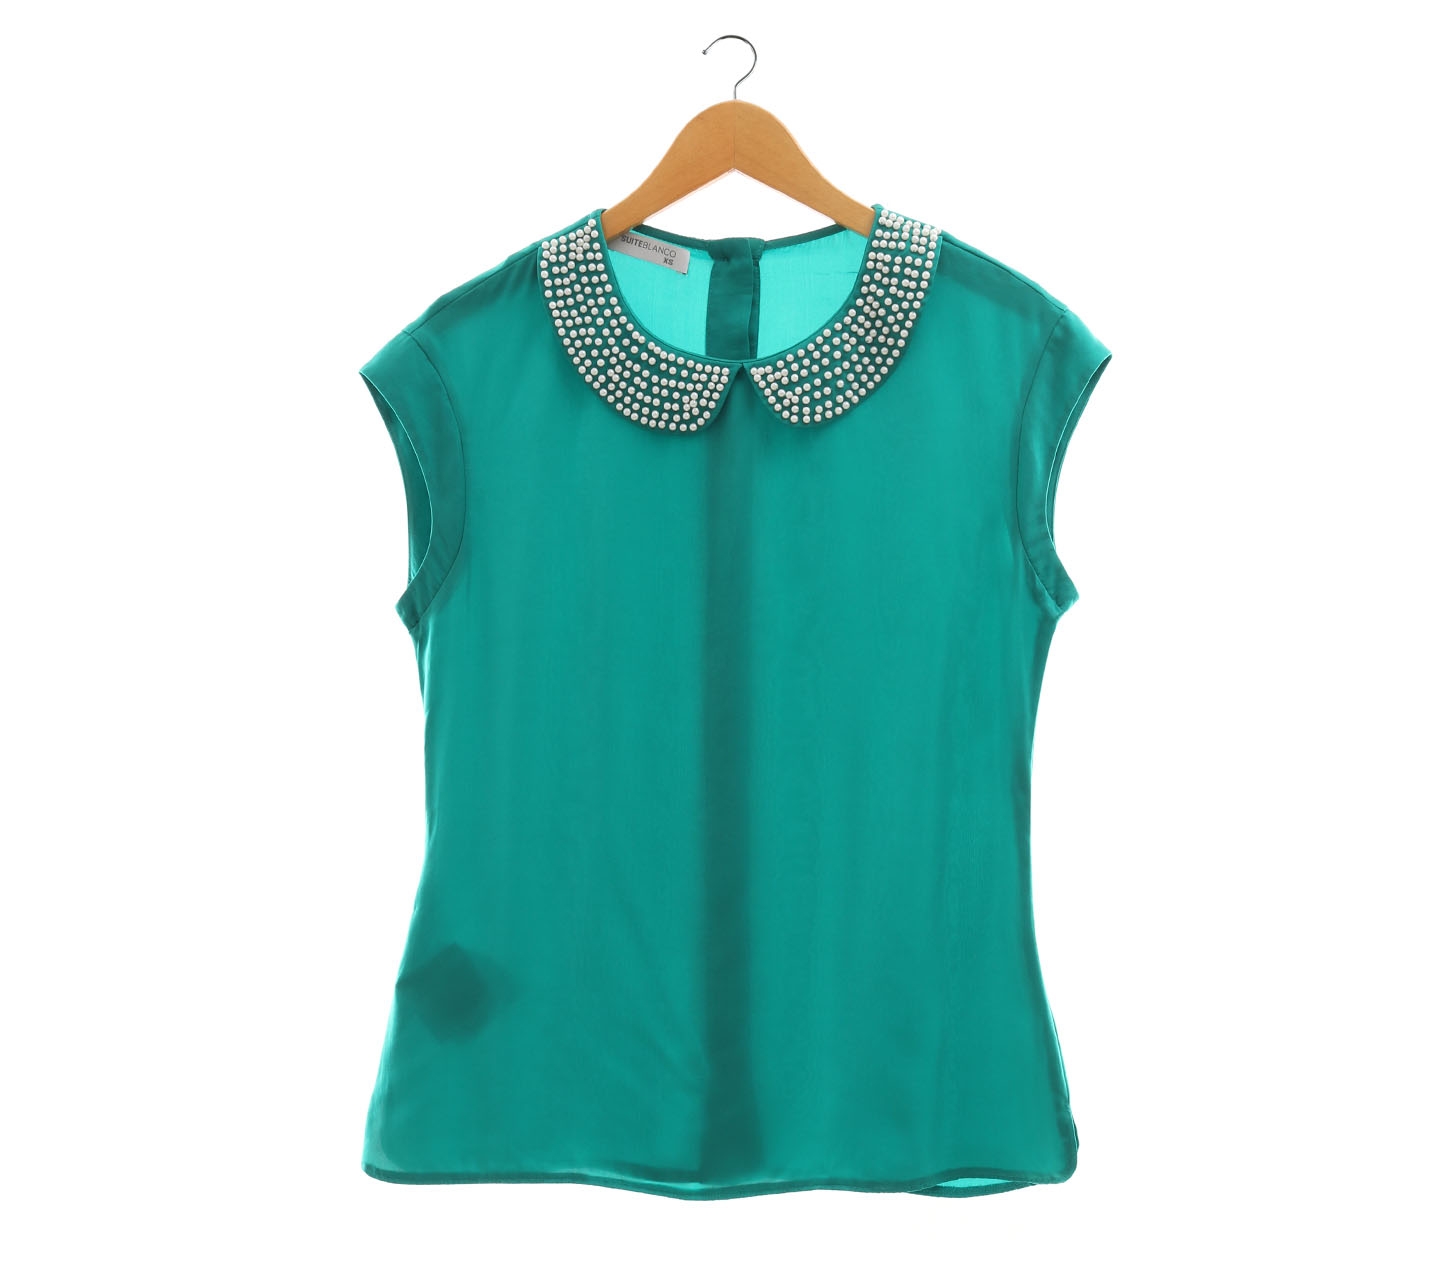 Suite Blanco Green Pearl Blouse